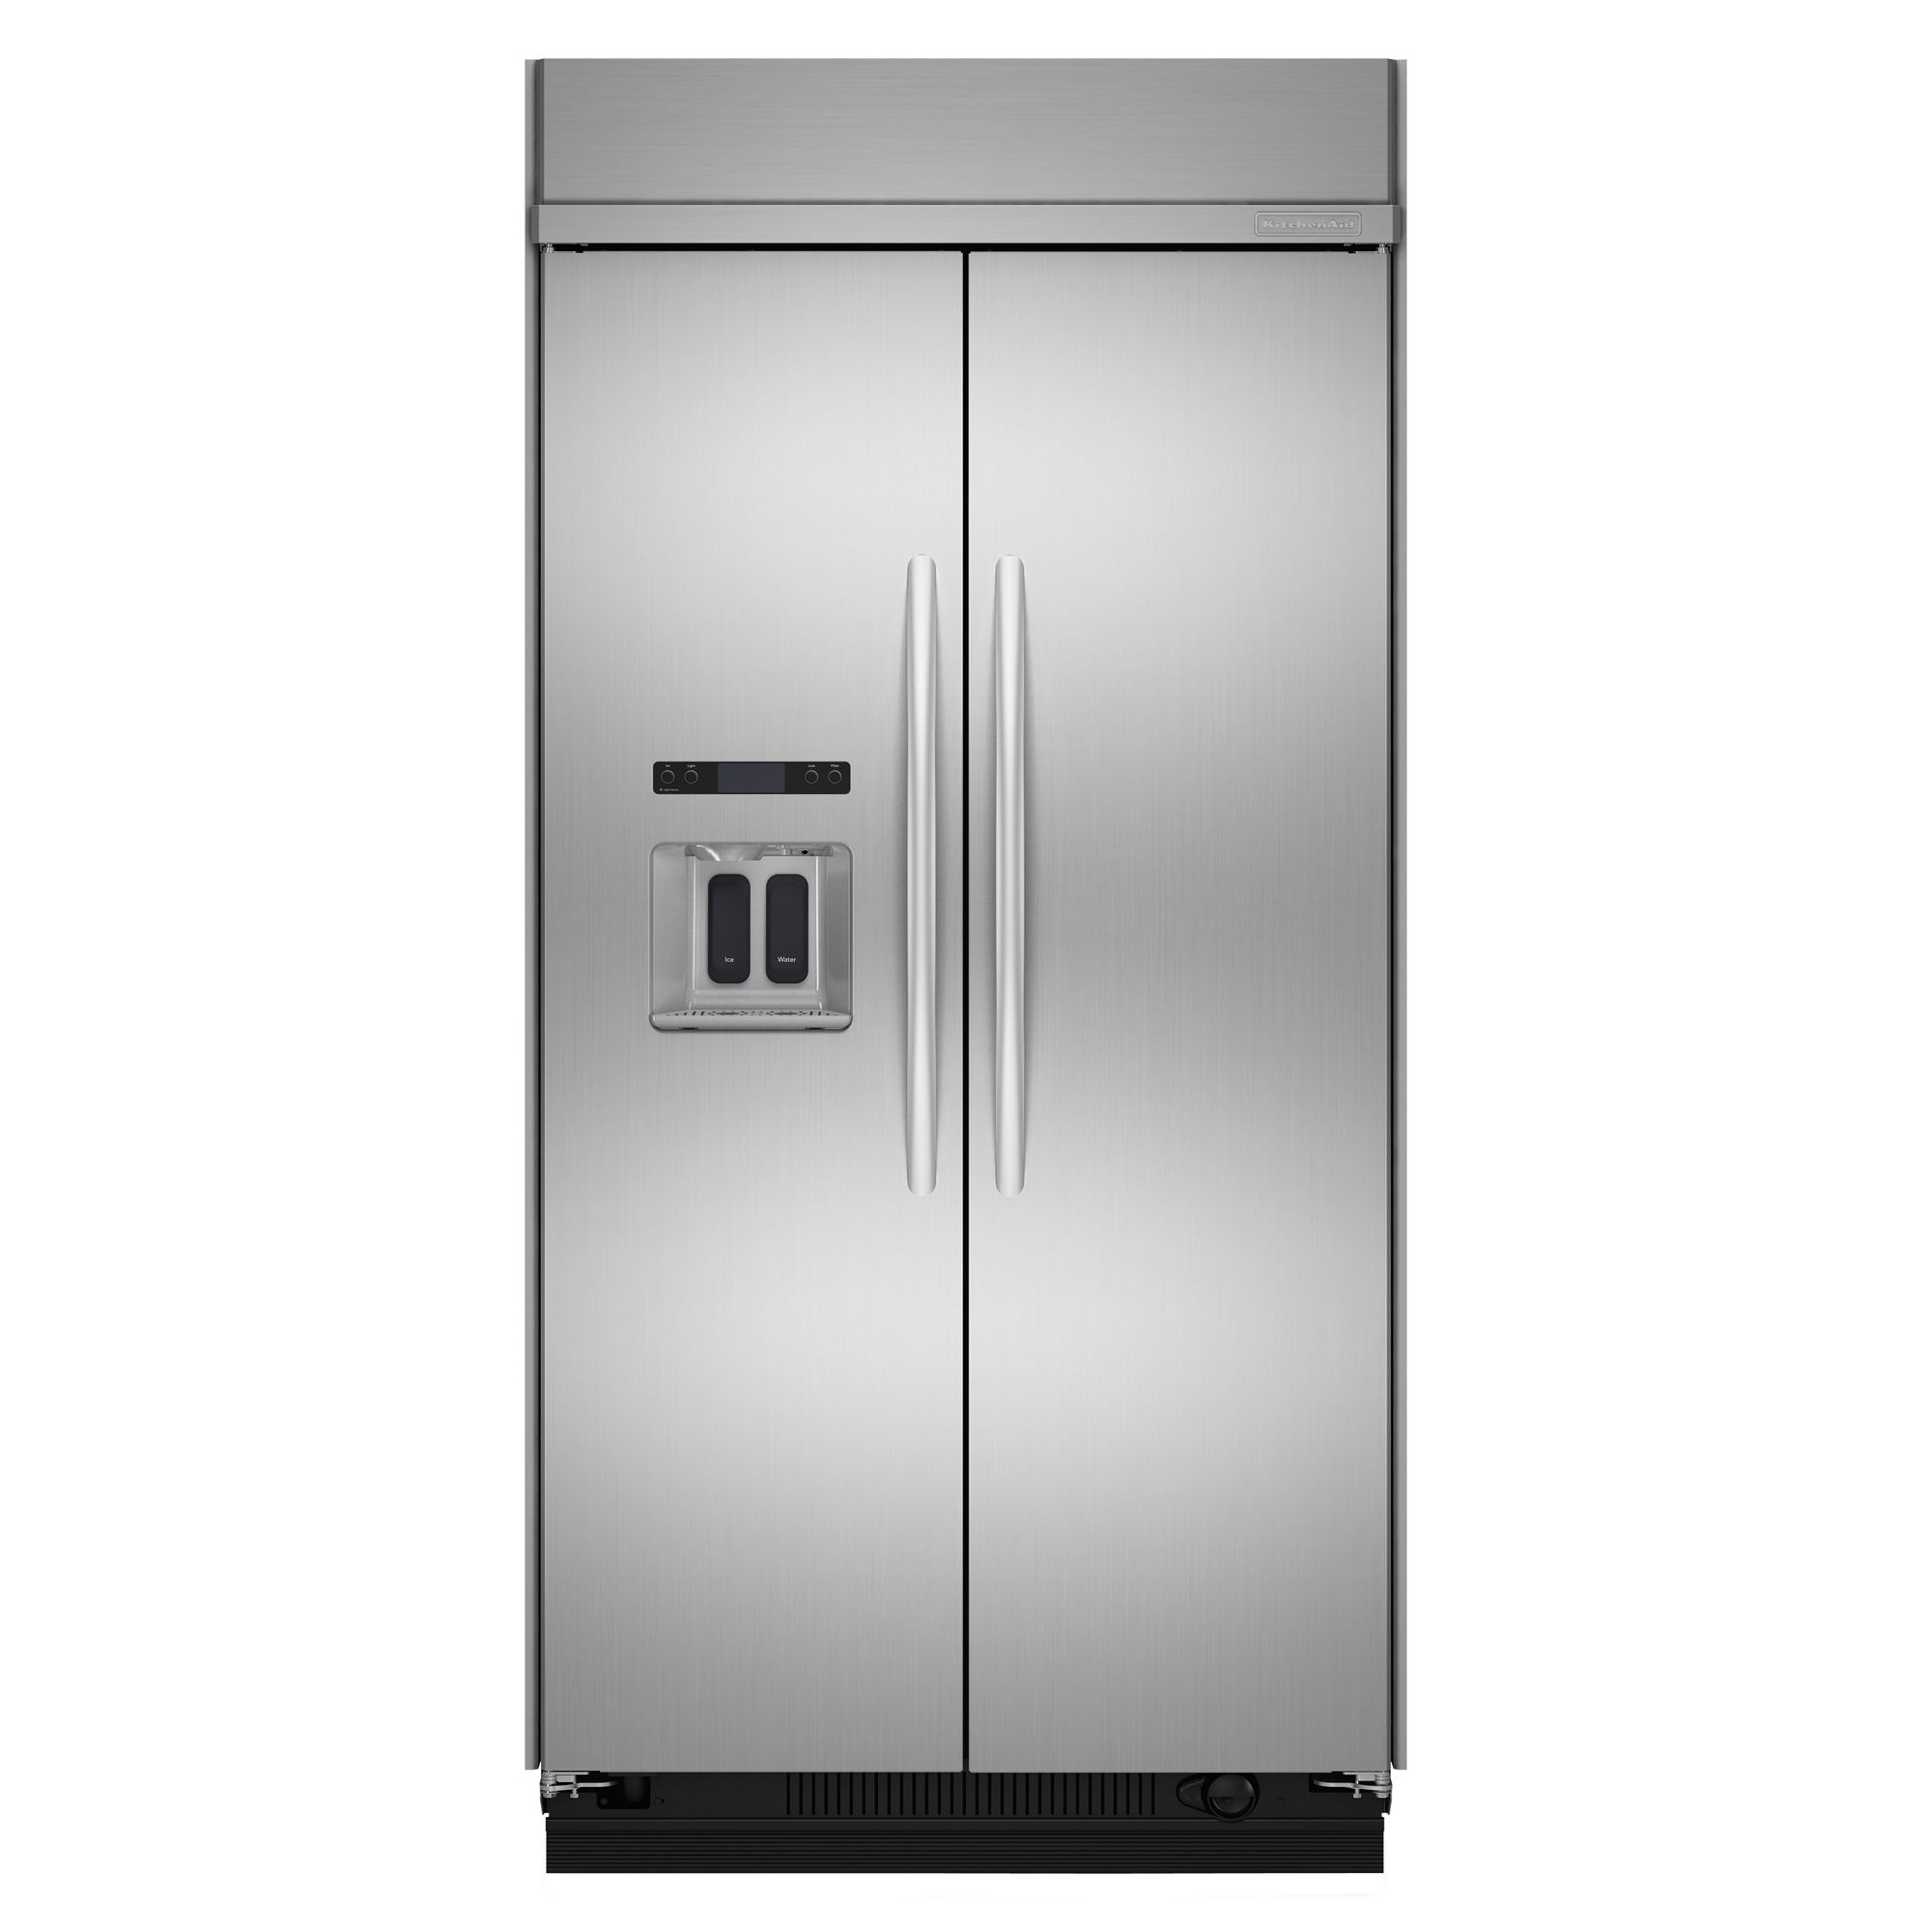 KitchenAid 29.8 cu. ft. Built-In Side-by-Side Refrigerator - Stainless Steel